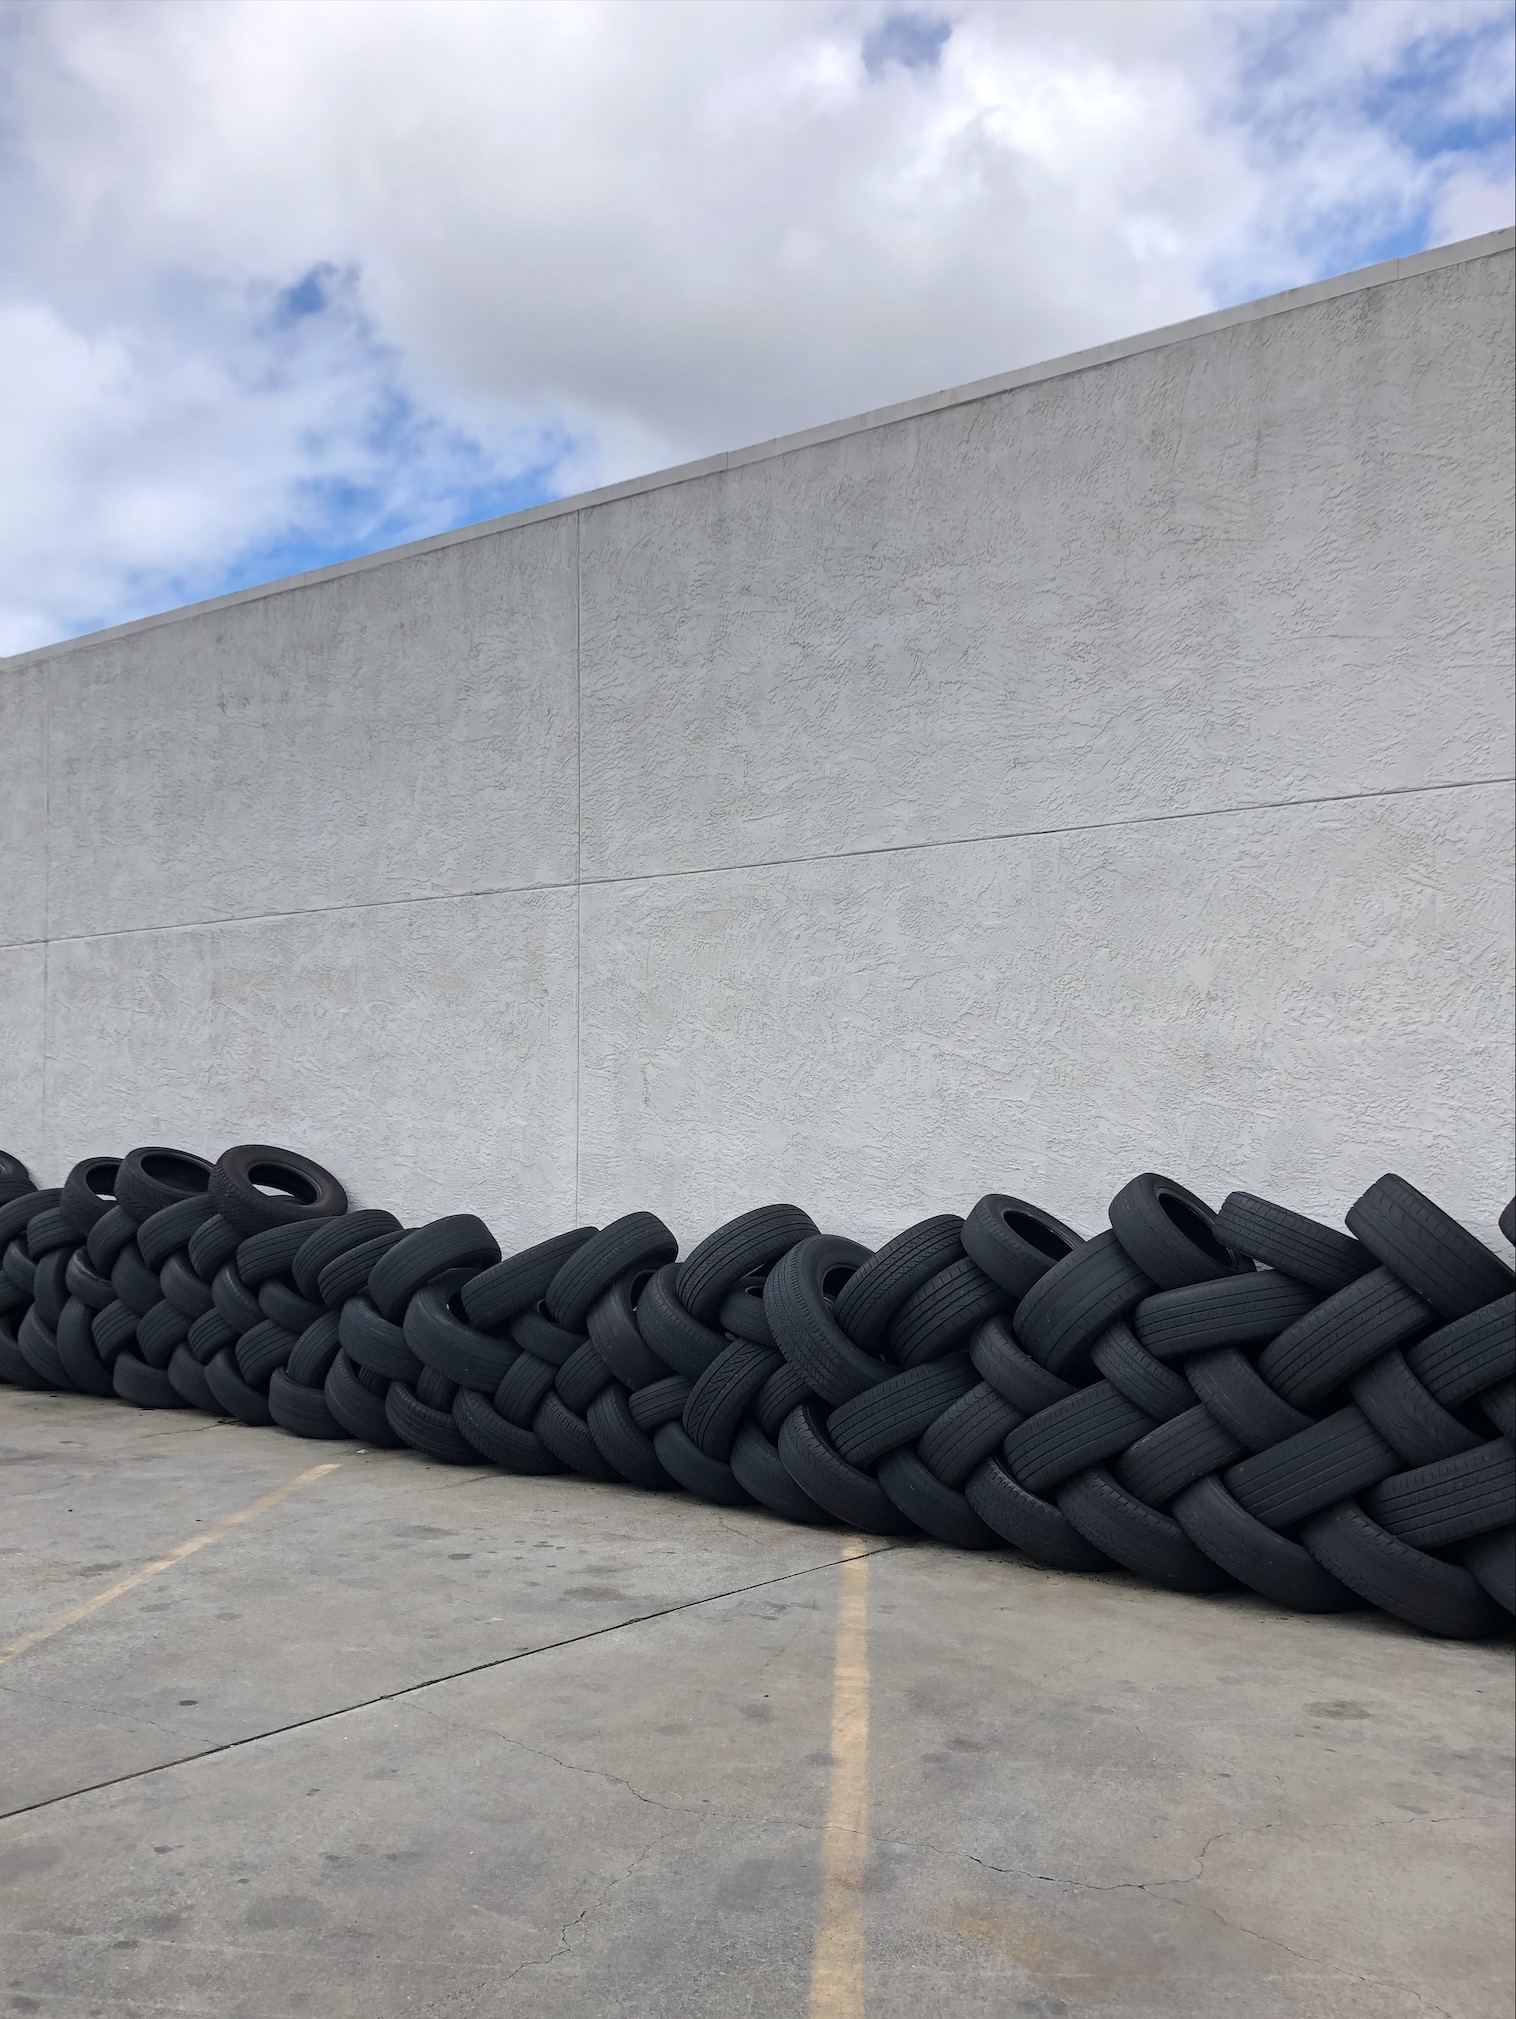 stacks of used tires